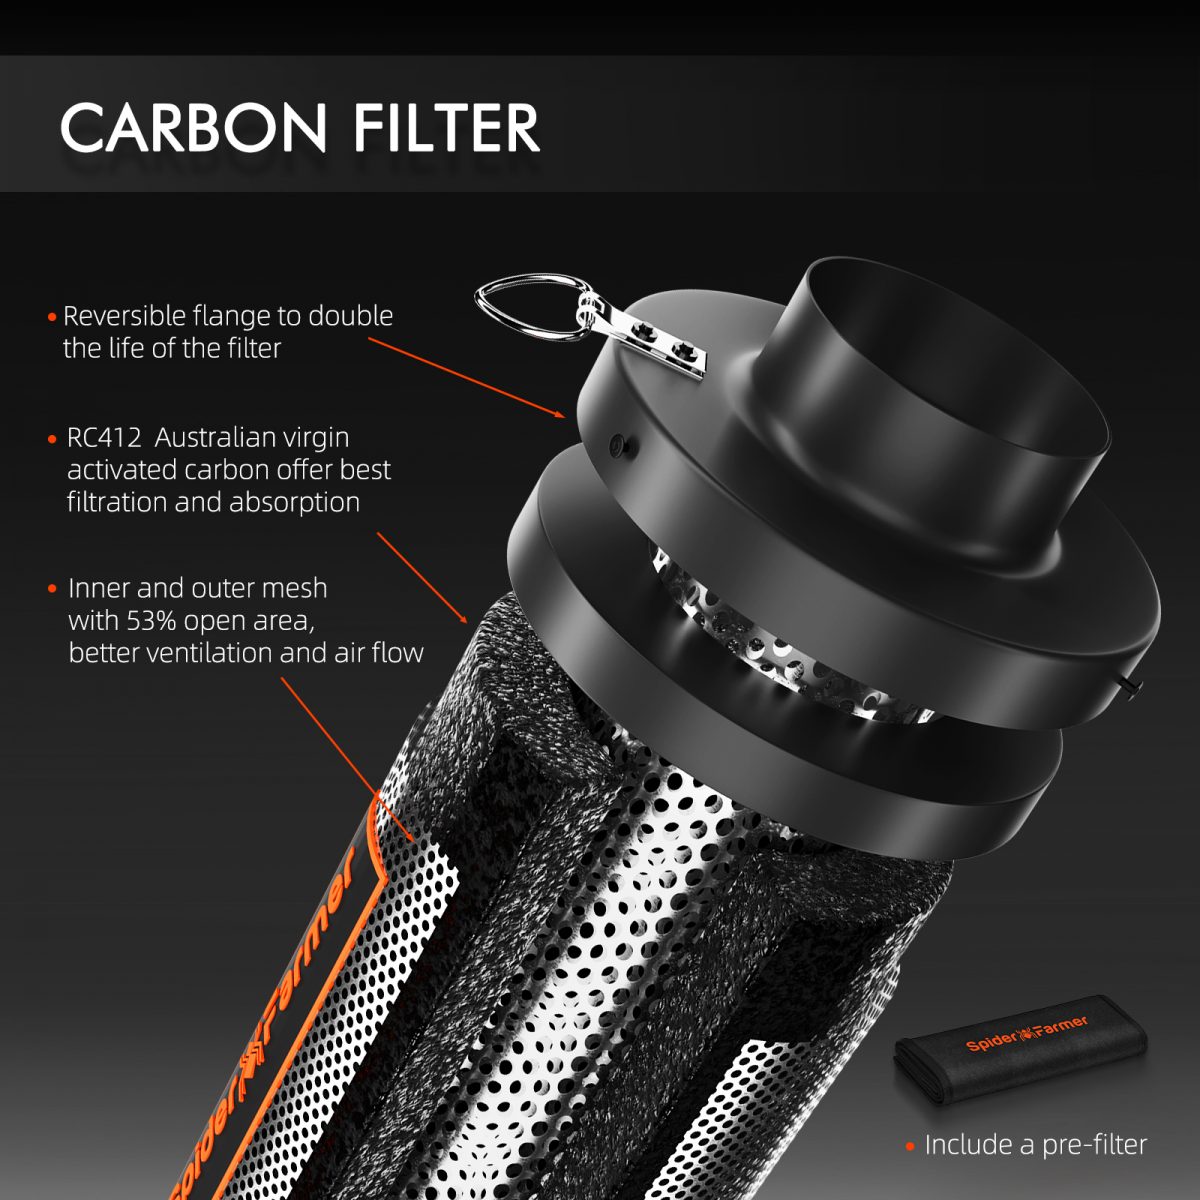 Spider Farmer Carbon Filter Specification - High-Quality Indoor Air Purification